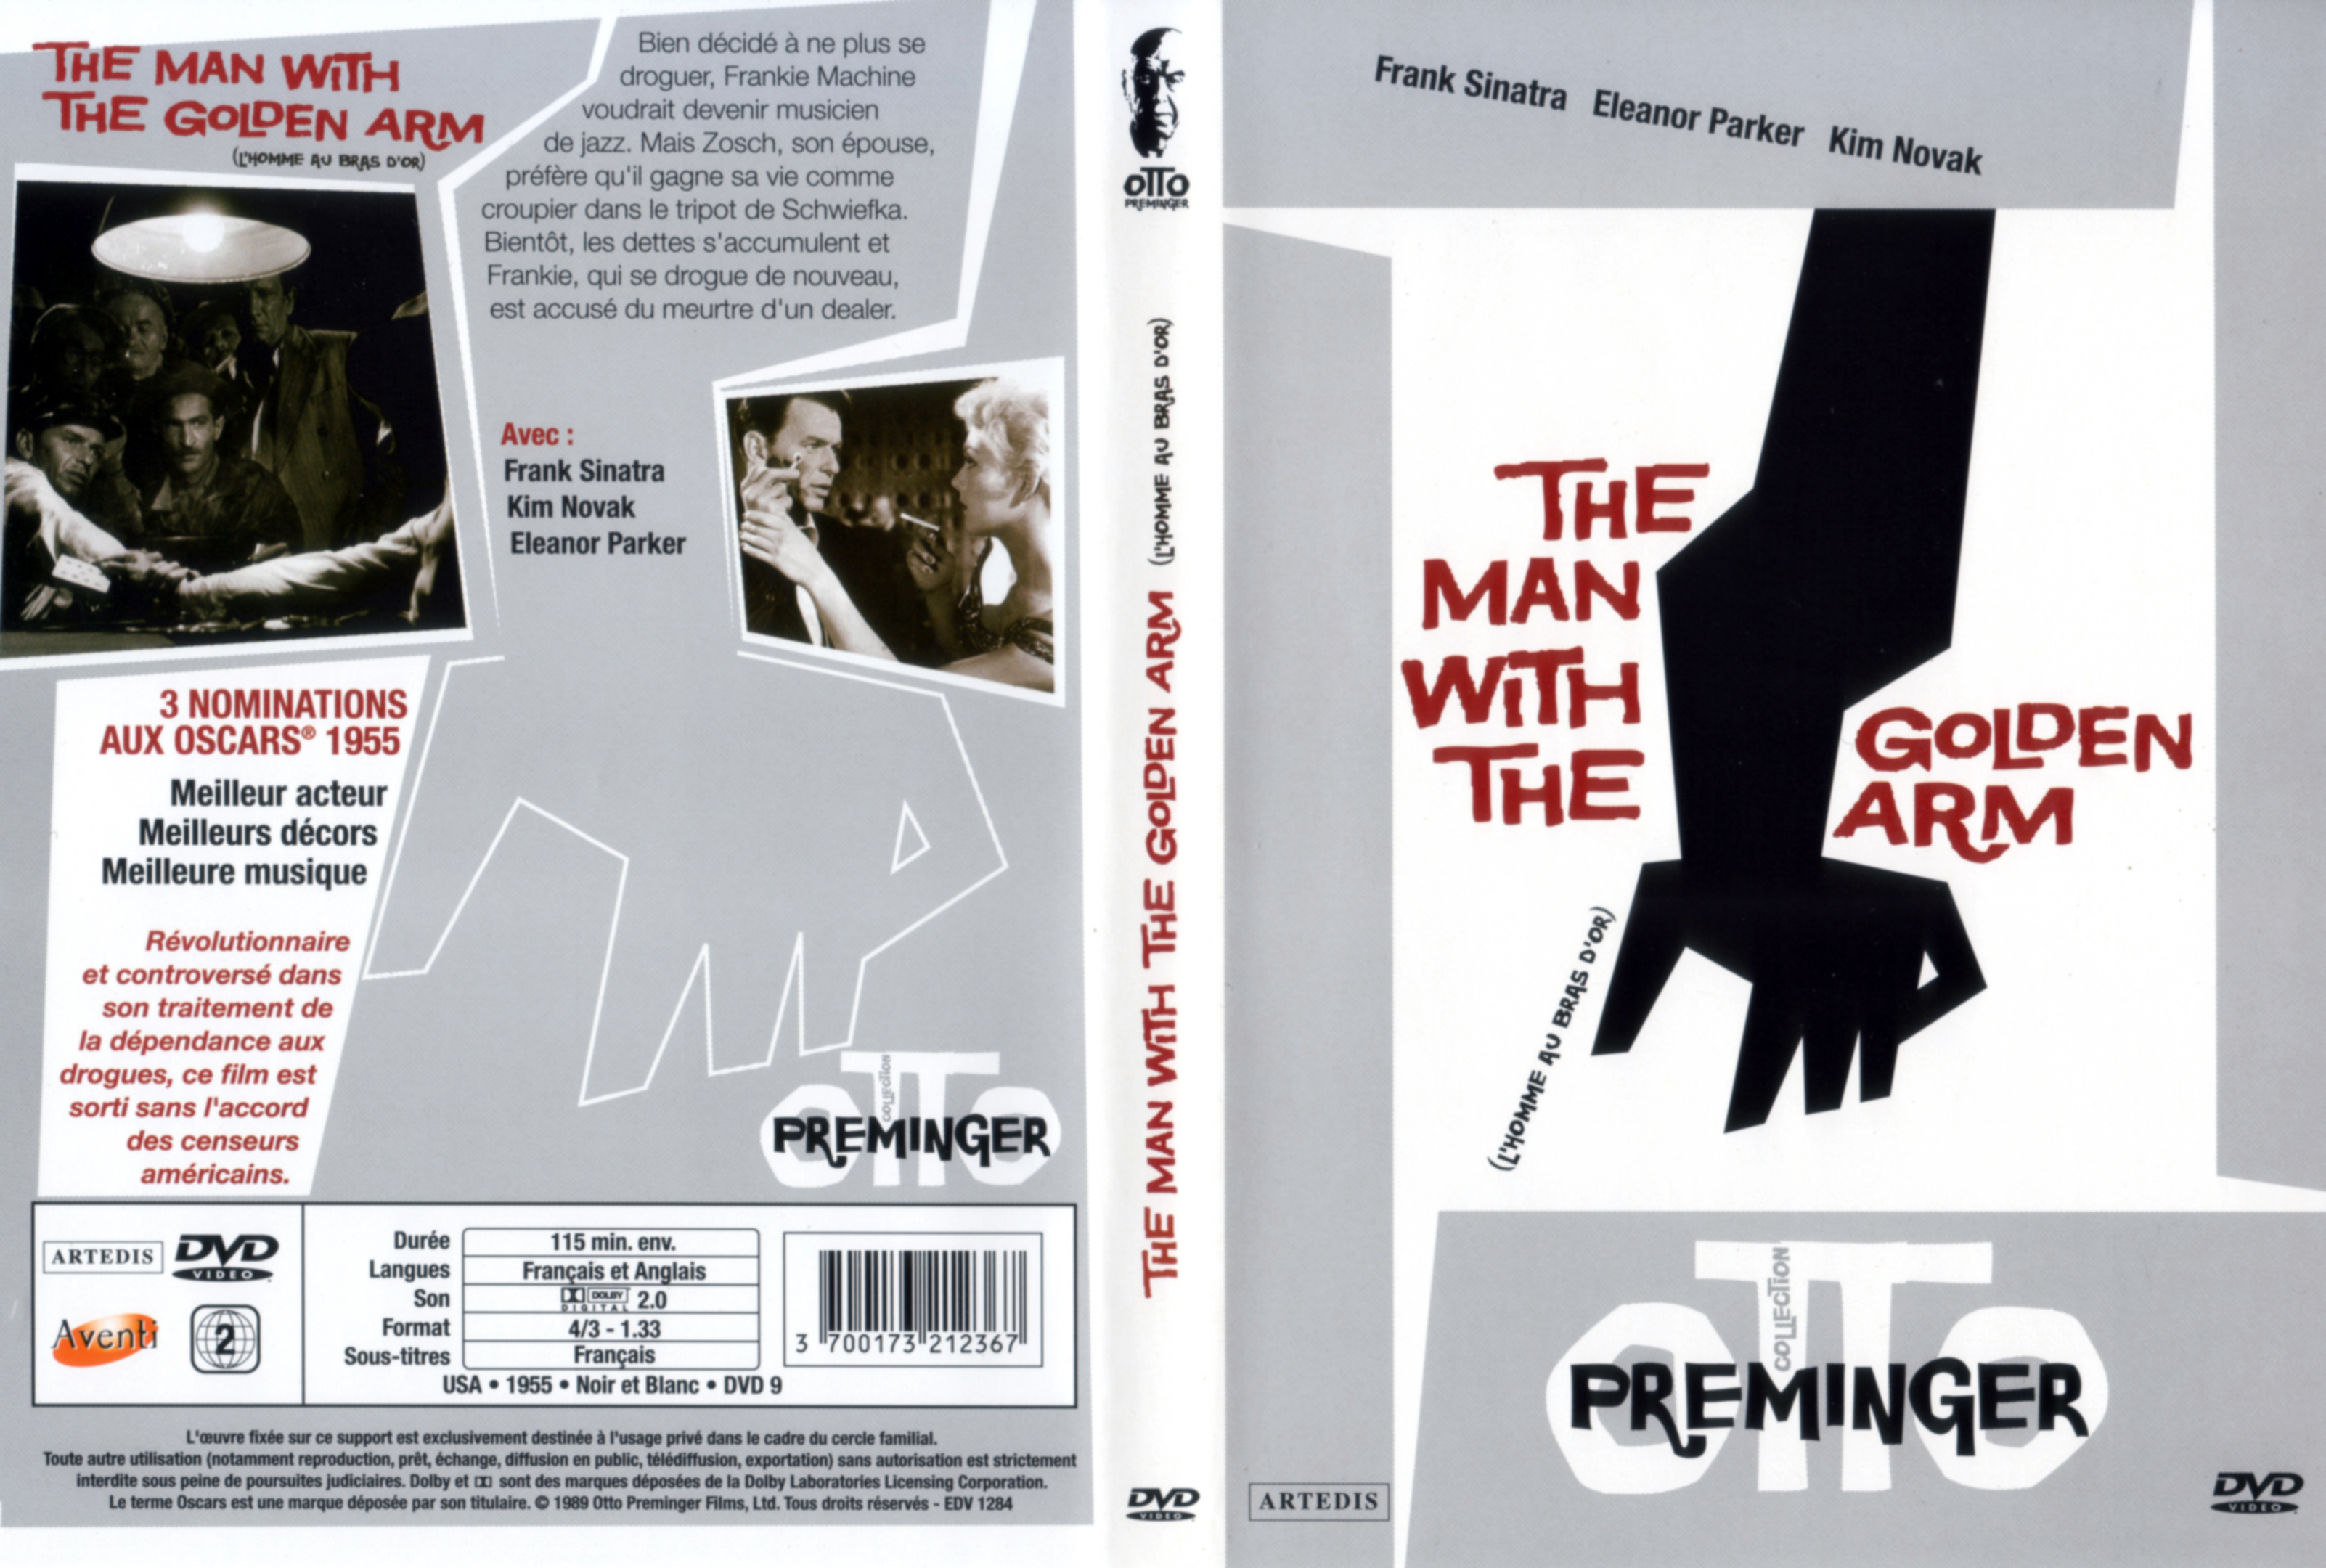 Jaquette DVD The man with the golden arm - L